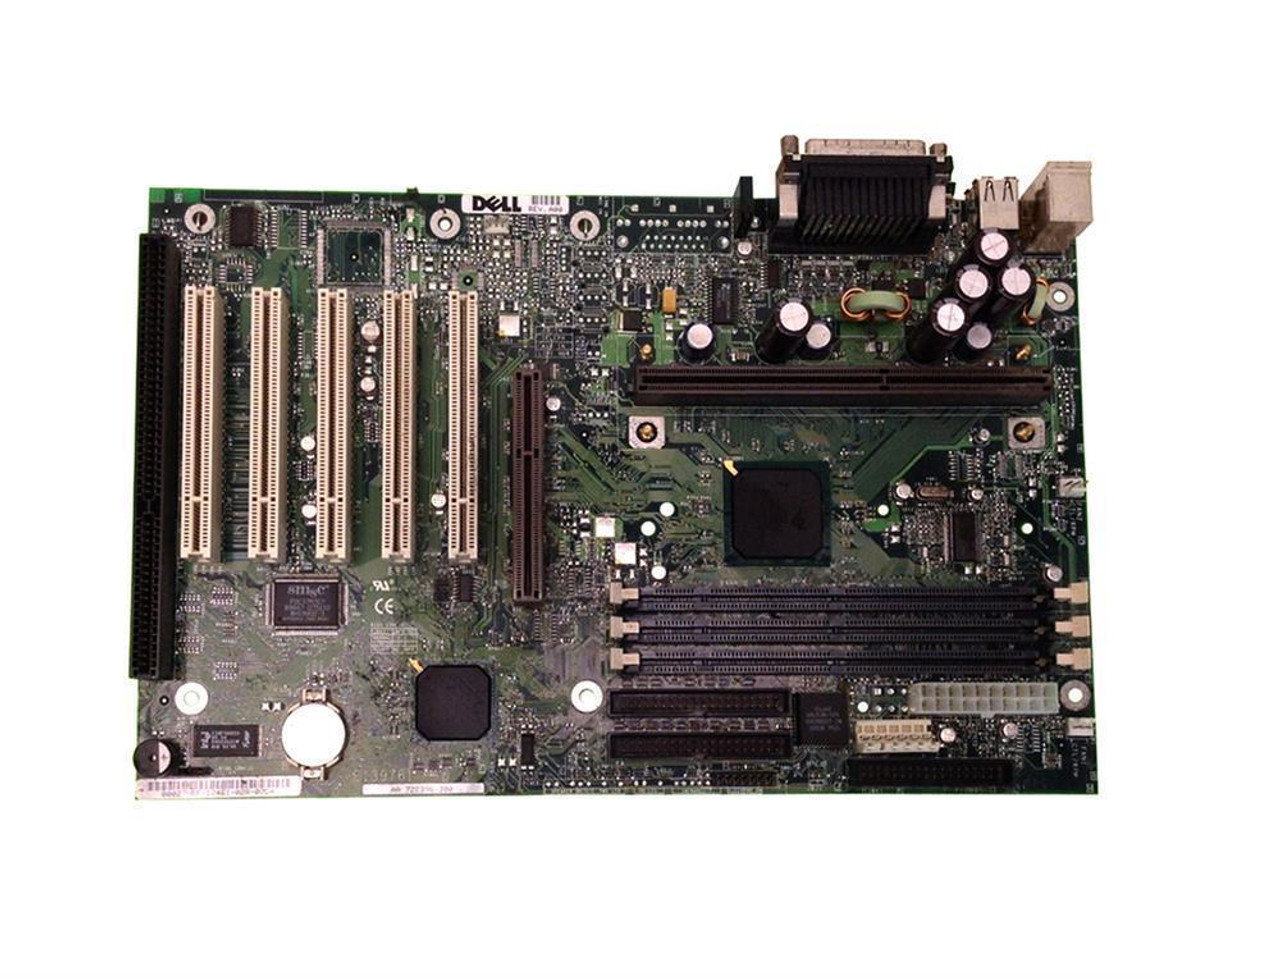 007073D Dell System Board (Motherboard) For Dimension Xps T (Refurbished)